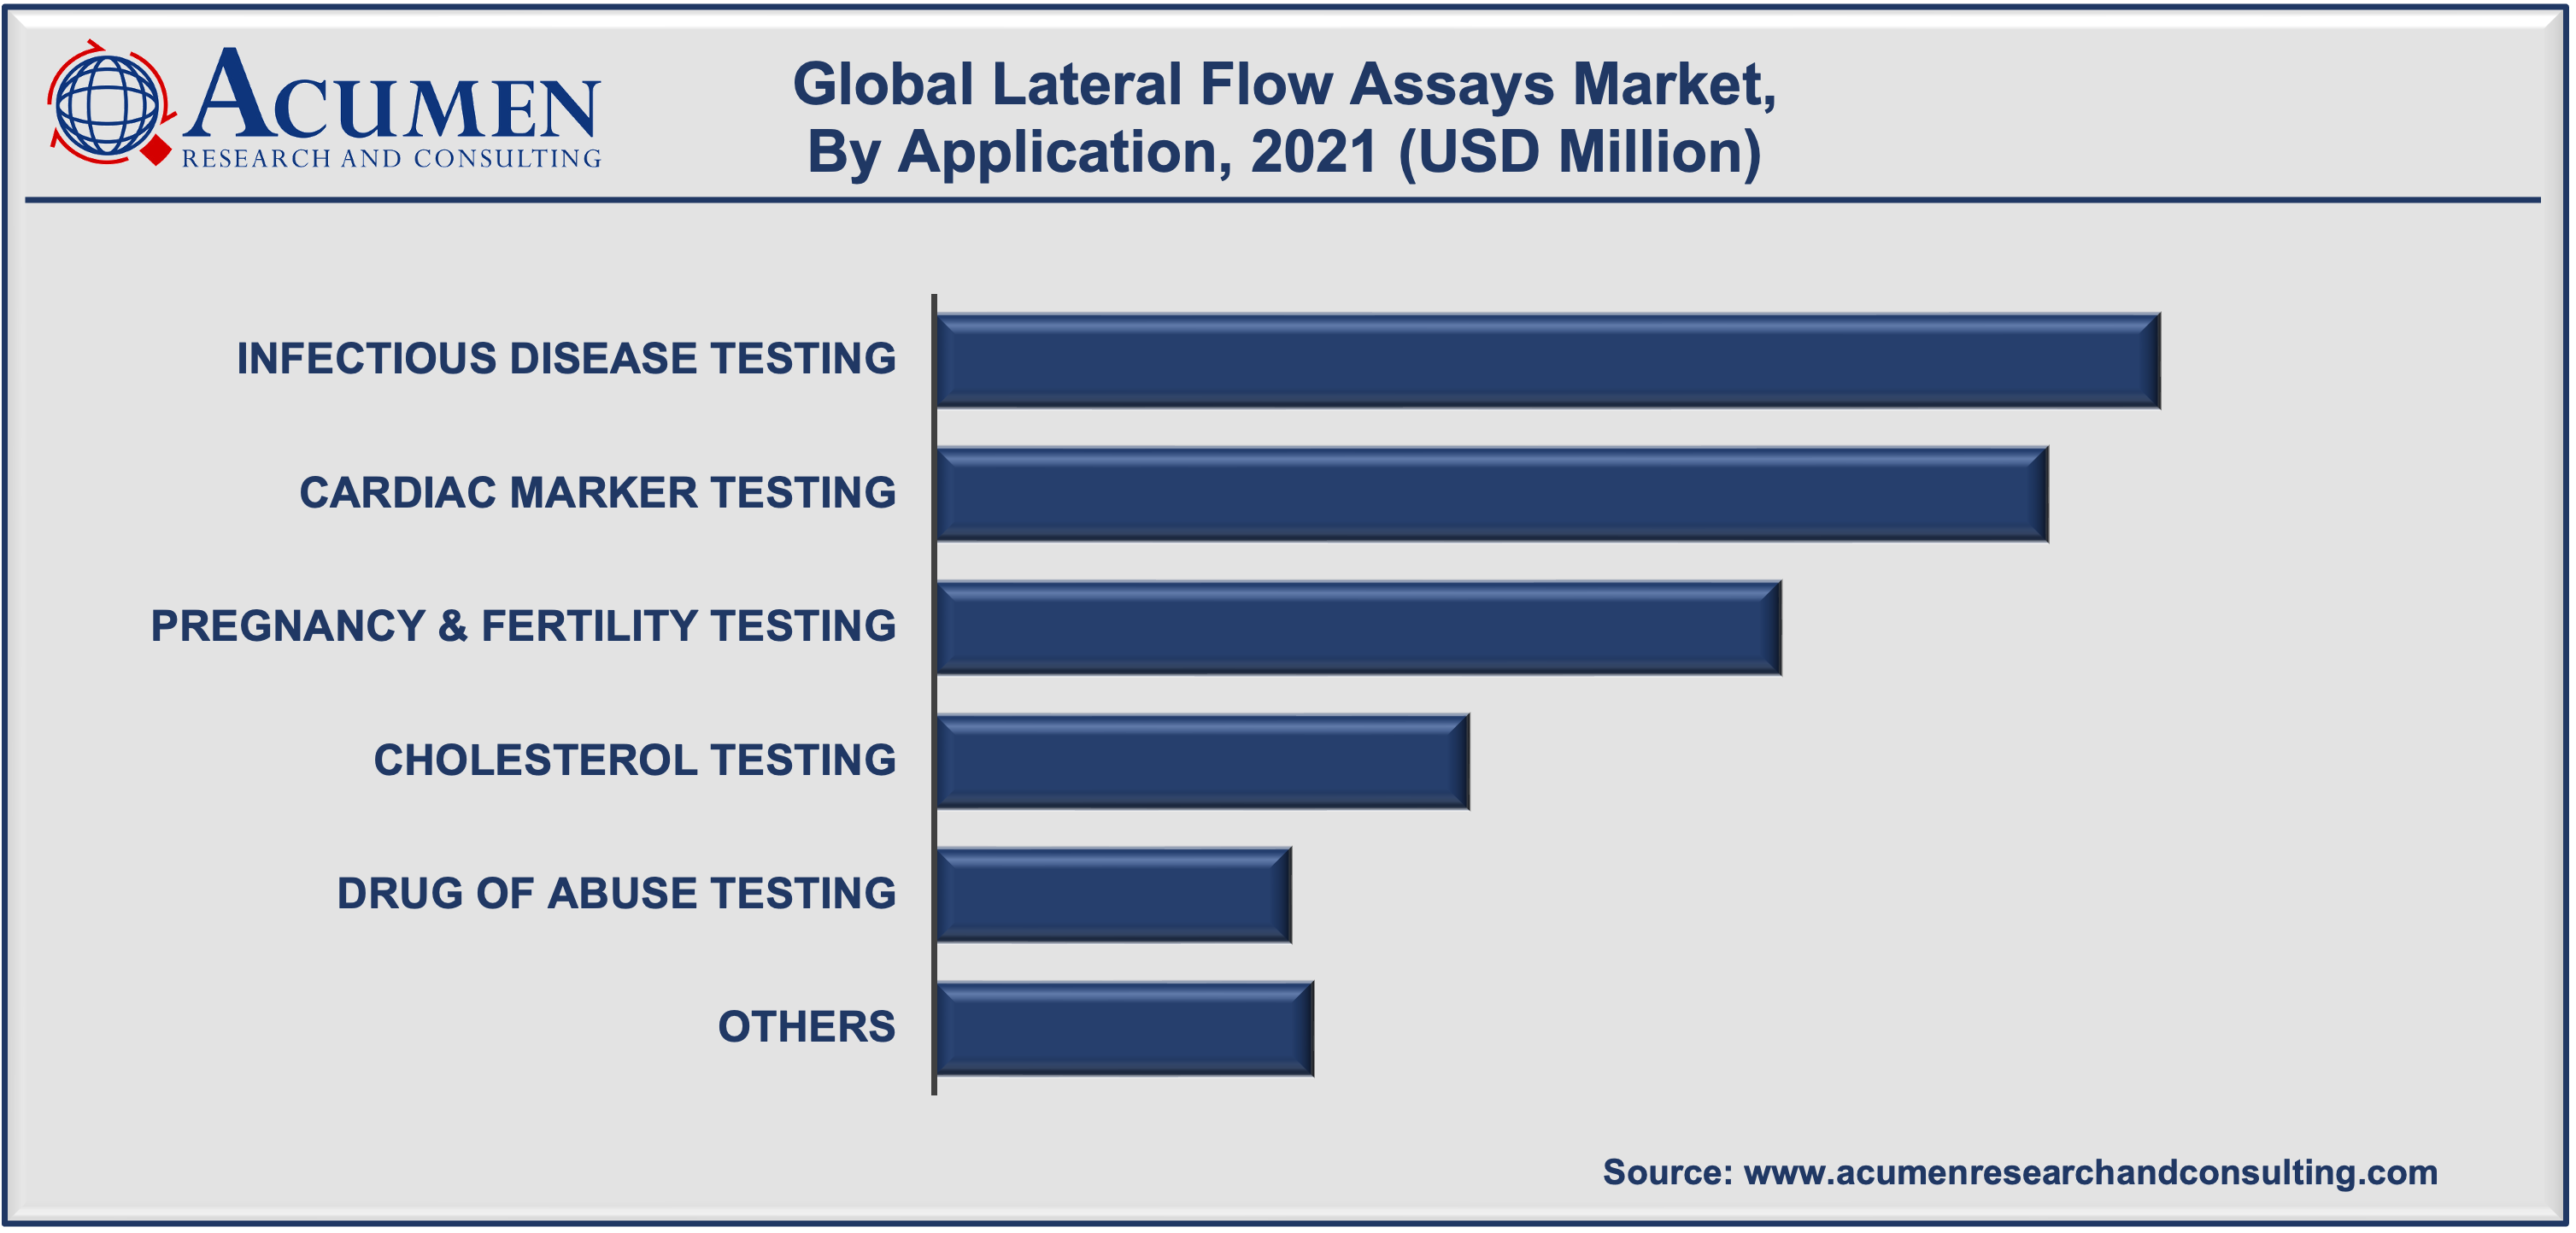 Lateral Flow Assays Market Size is expected to reach USD 13,317 Million by 2030, growing at a CAGR of 5.5%